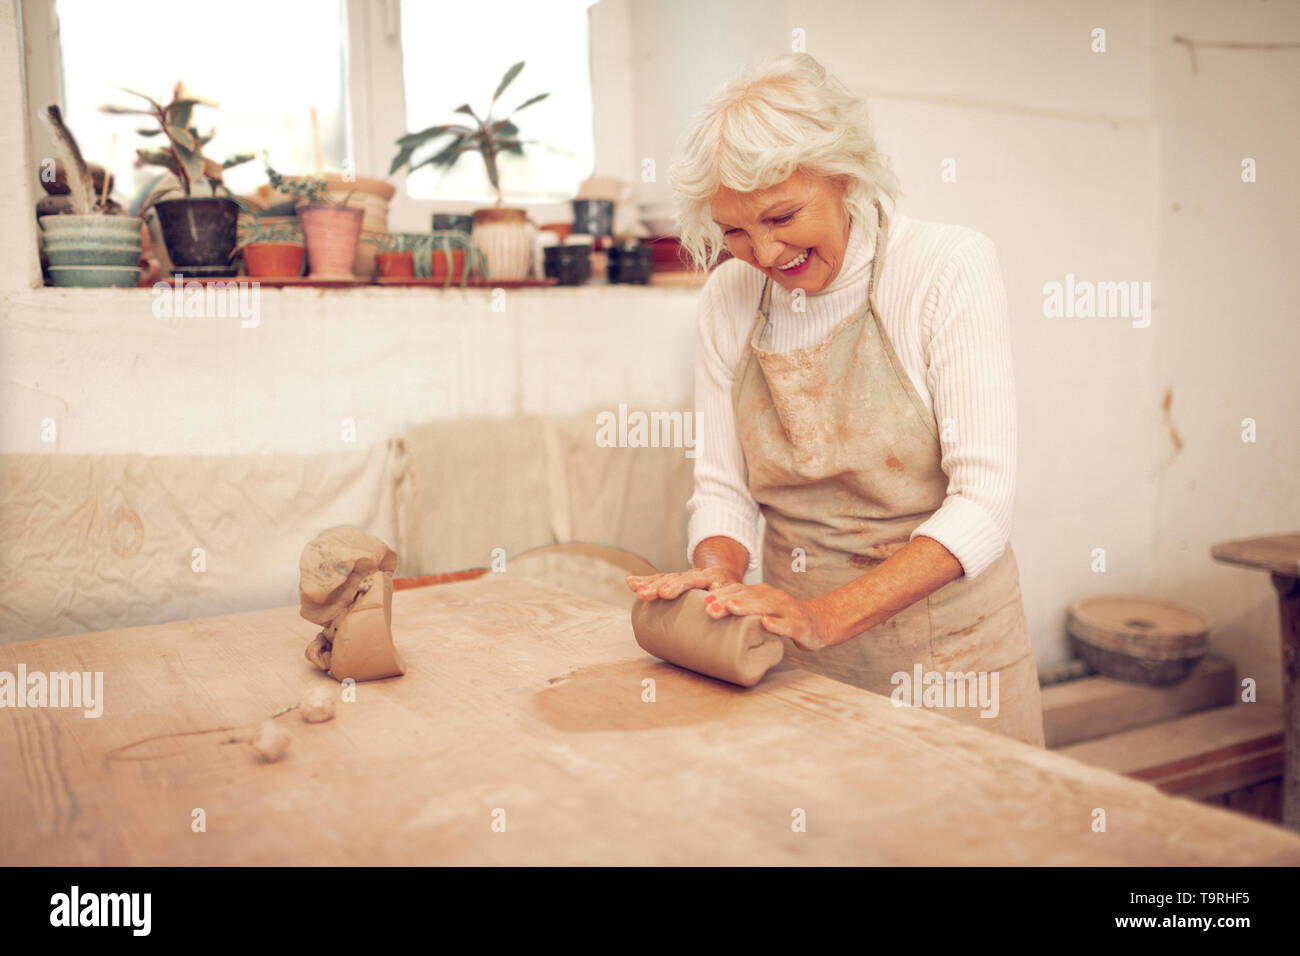 Positive happy woman being in a great mood Stock Photo